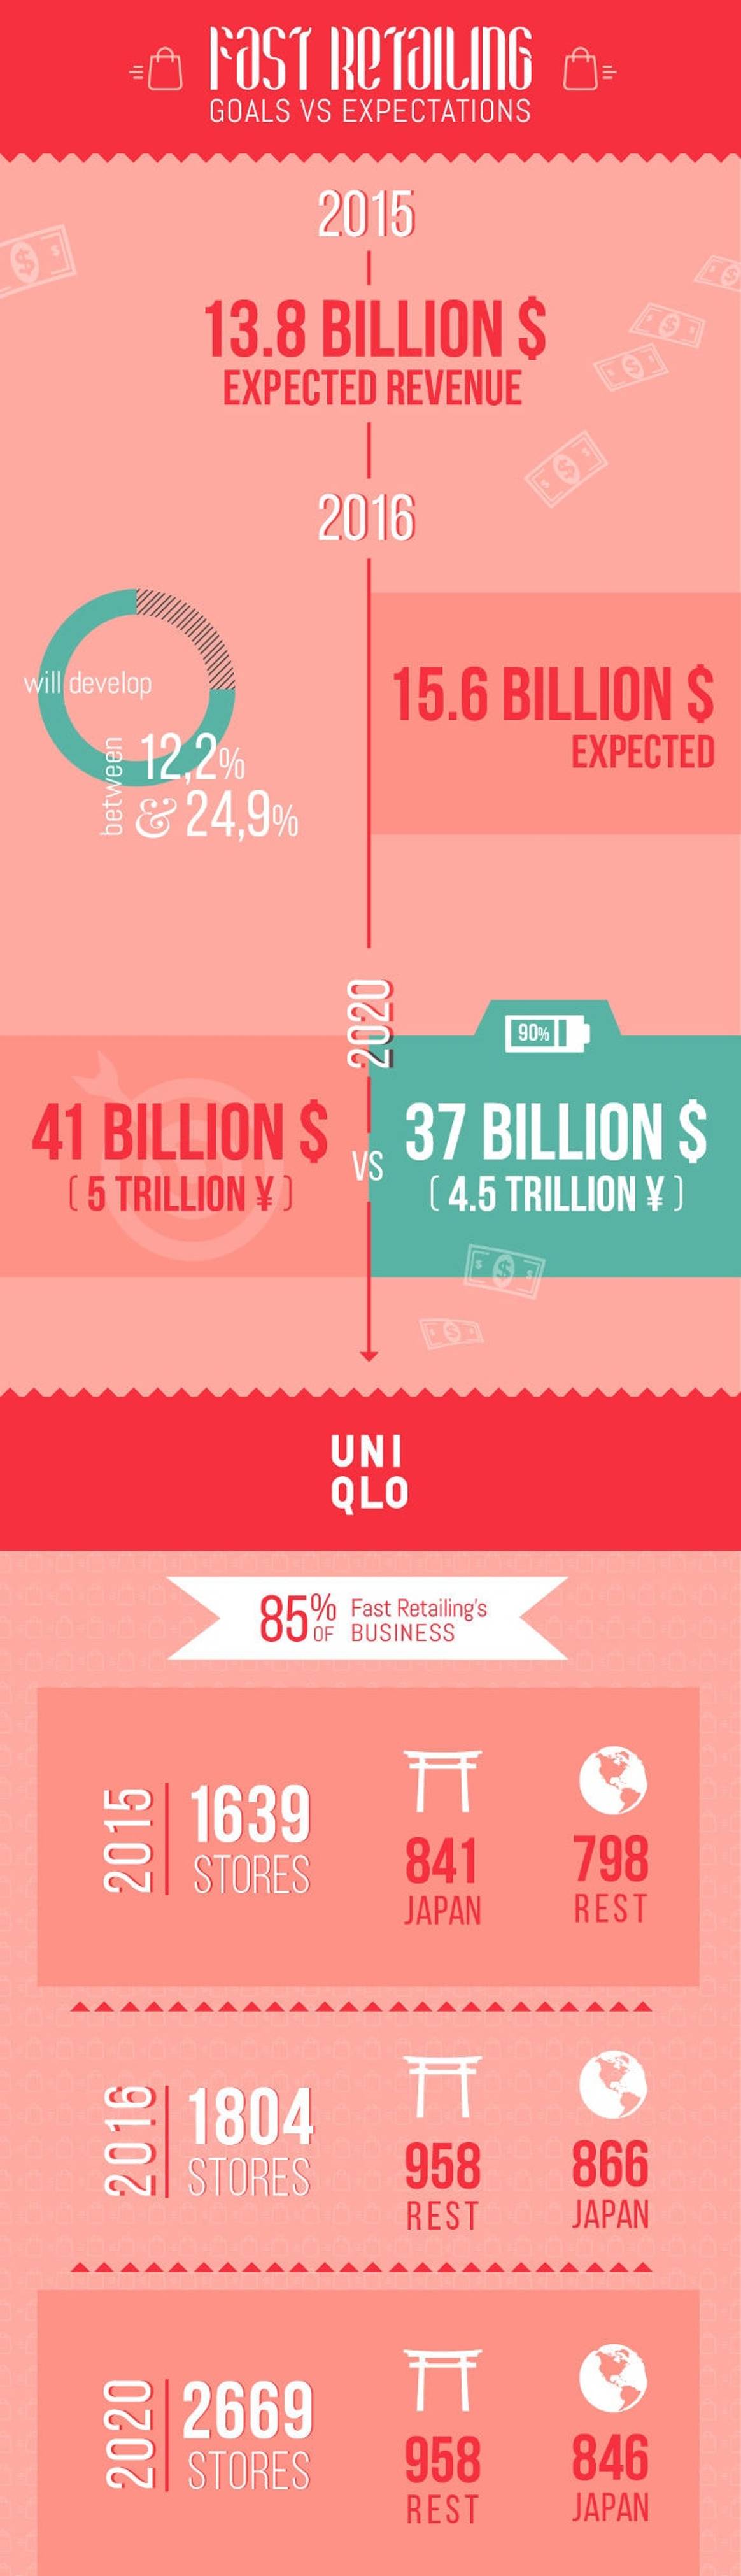 Infographic - How realistic is Fast Retailing's 2020 goal?